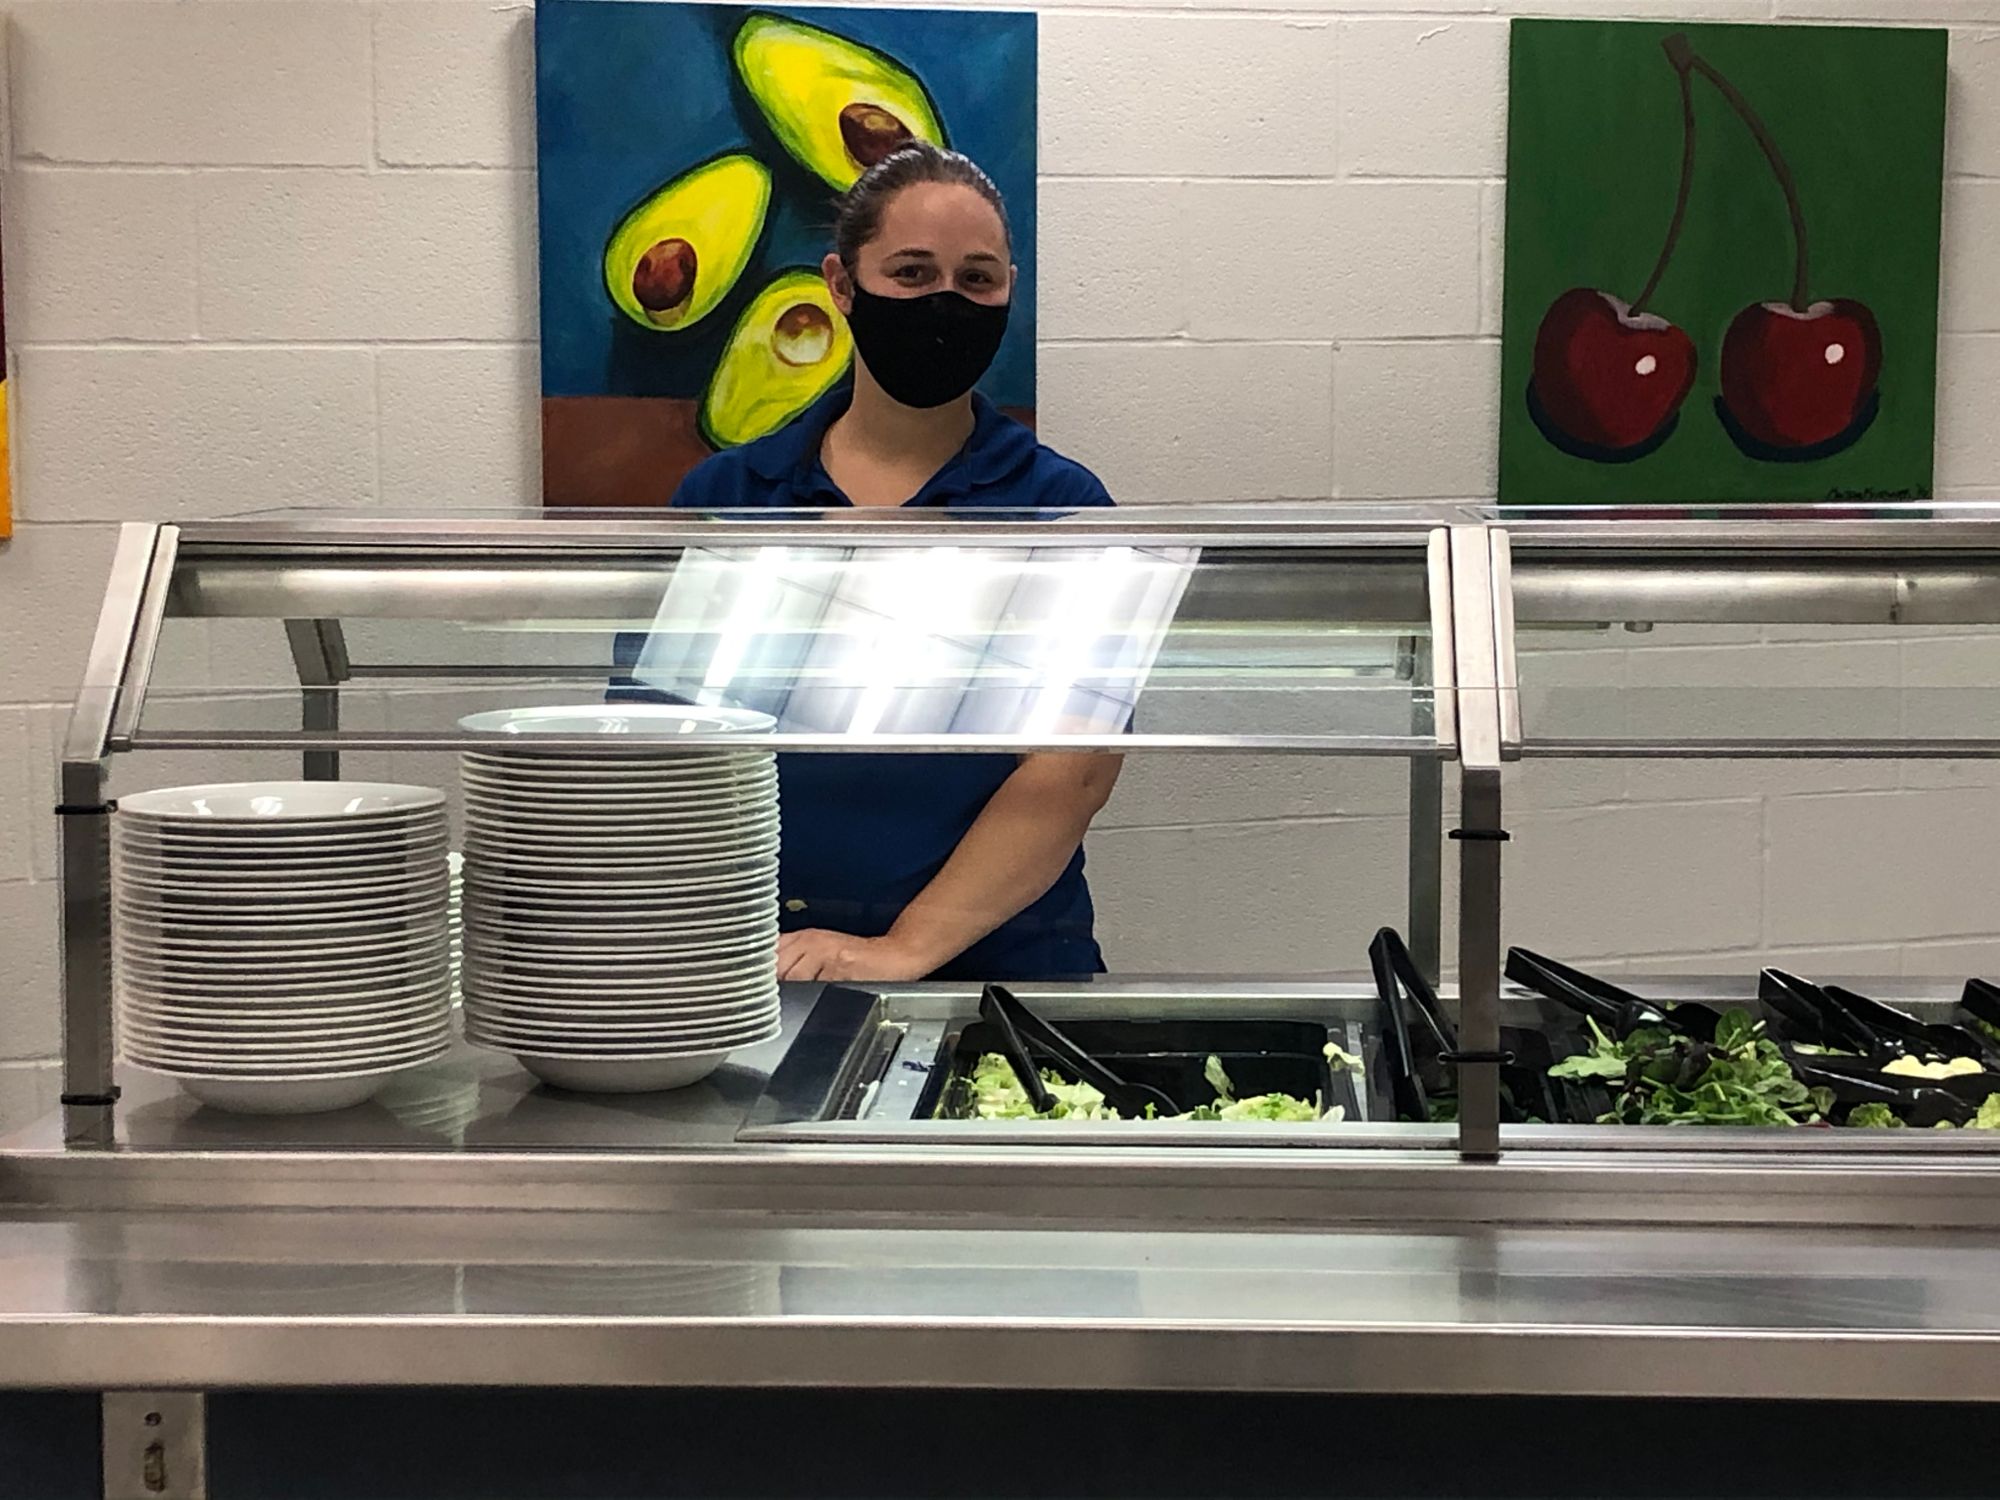 Salad bar in dining center now open, safety still top priority